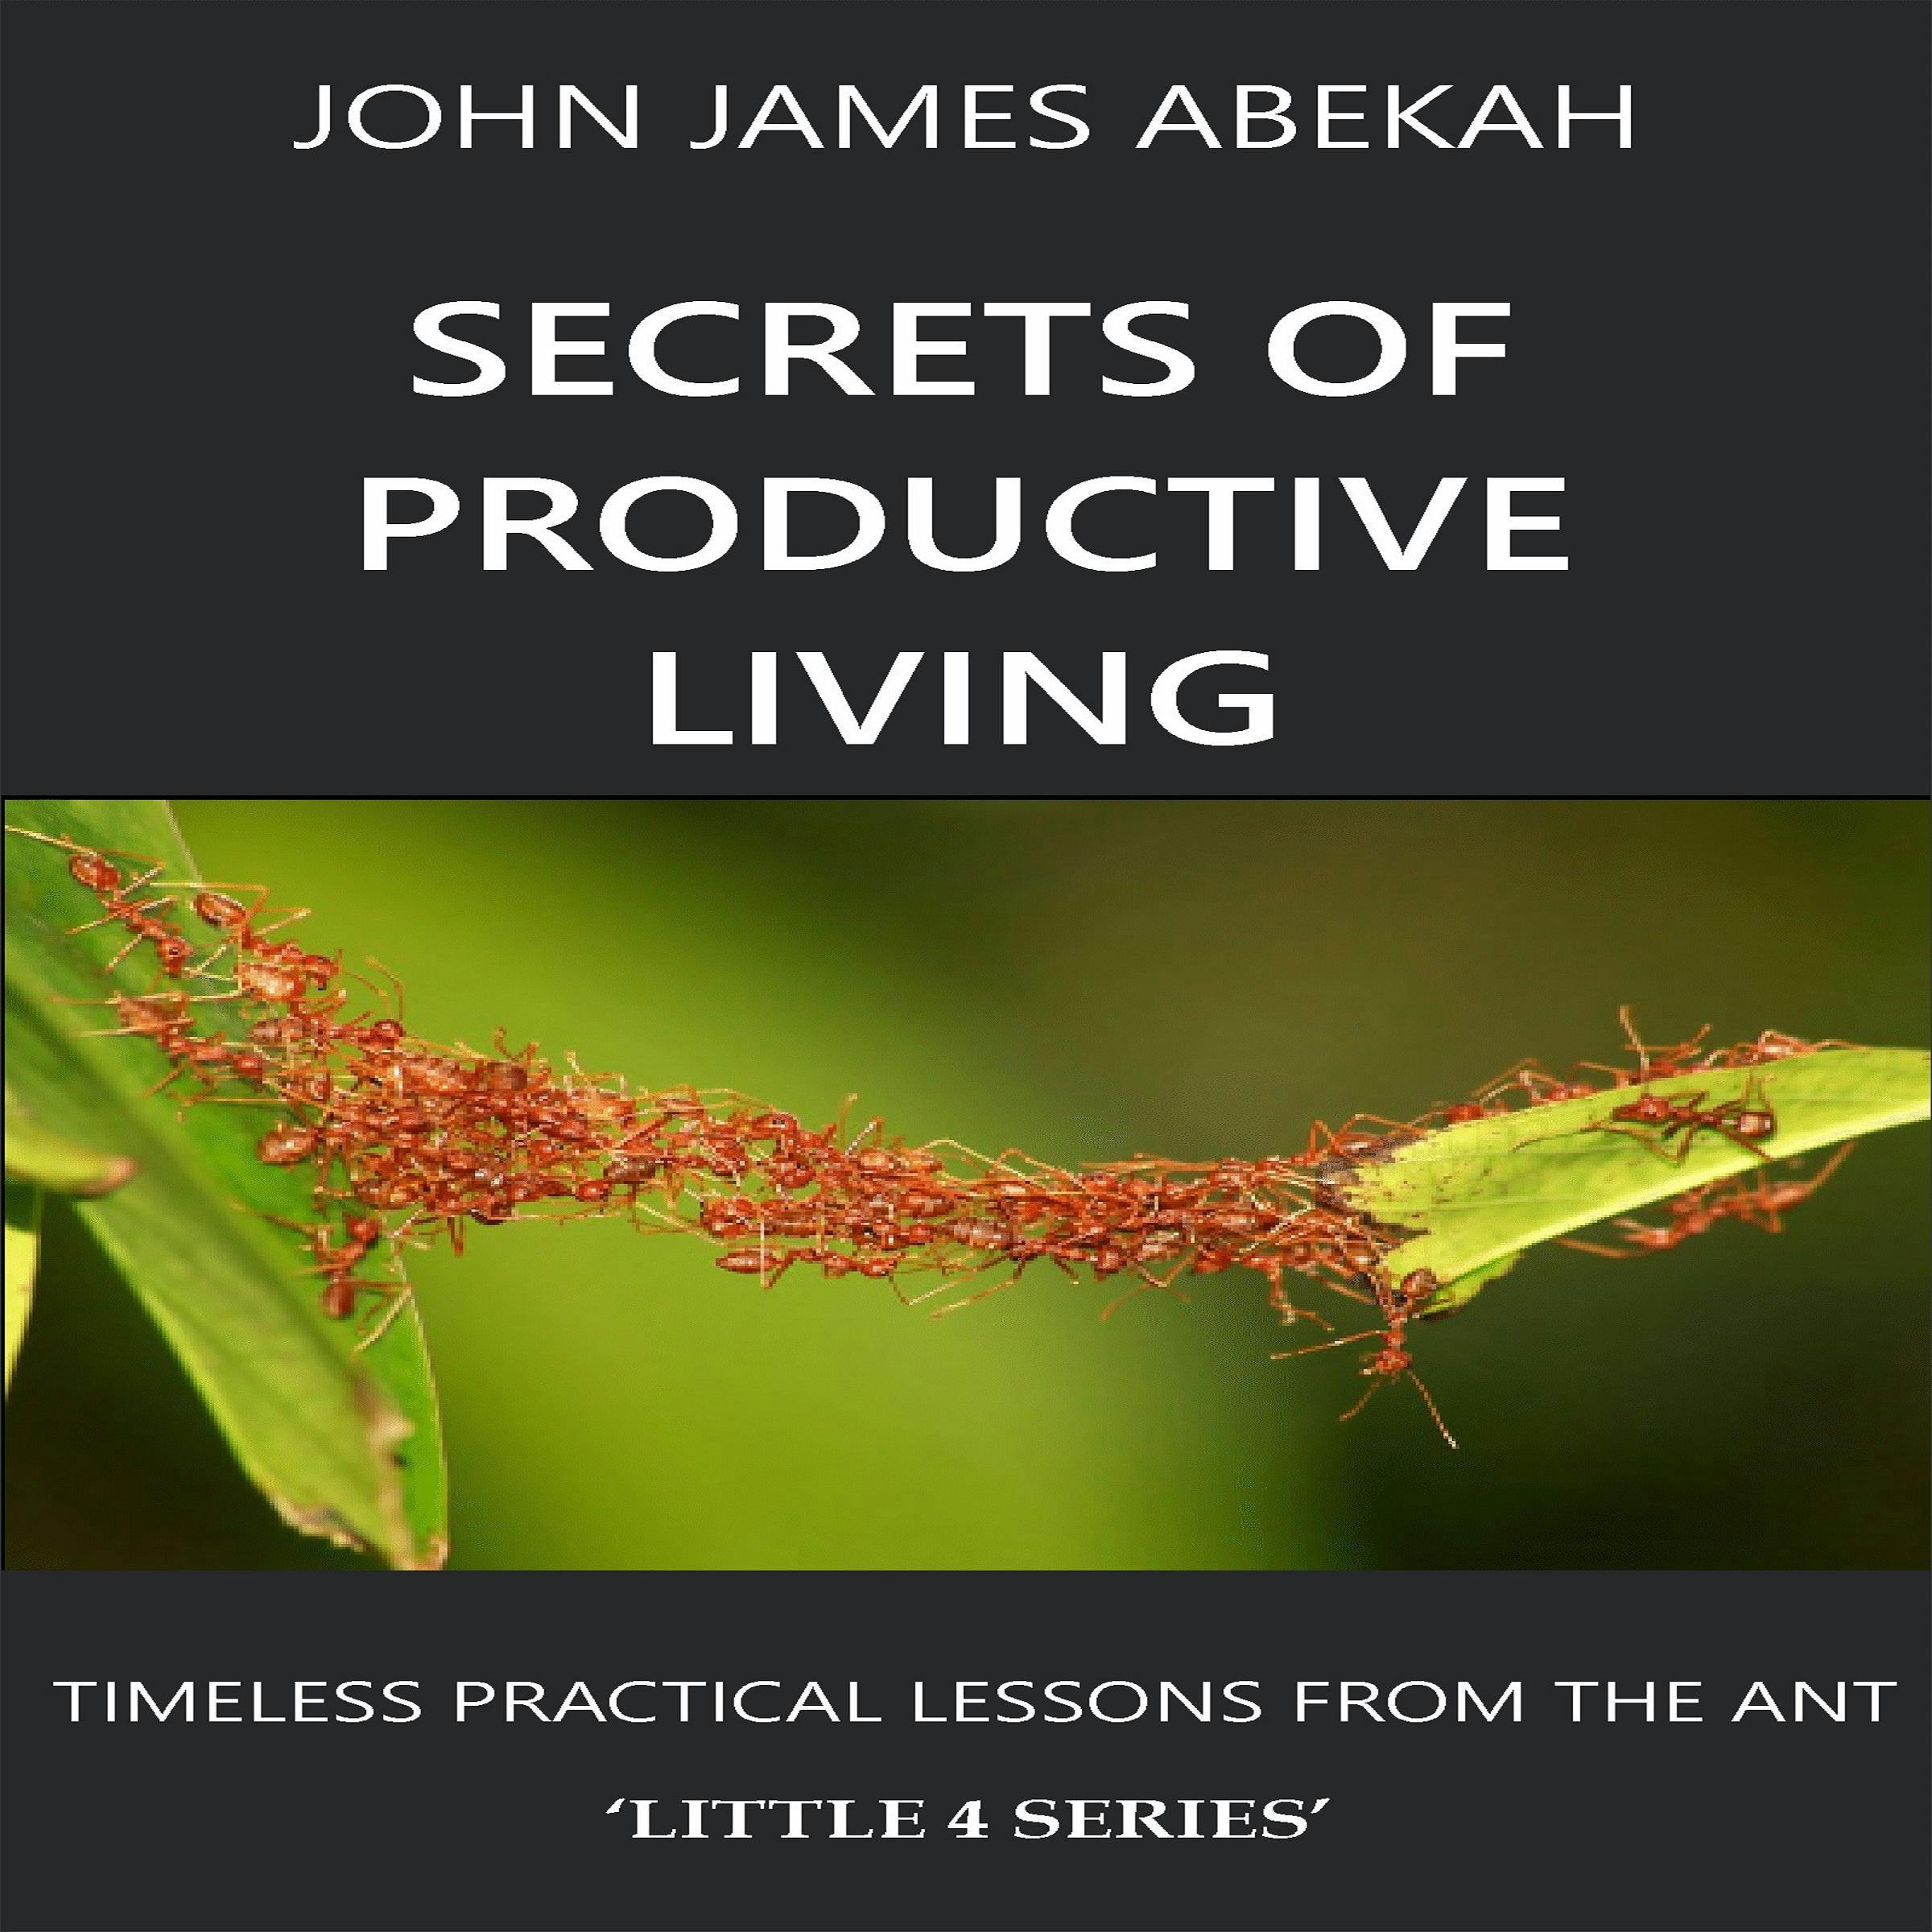 SECRETS OF PRODUCTIVE LIVING: TIMELESS PRACTICAL LESSONS FROM THE ANT - JOHN JAMES ABEKAH